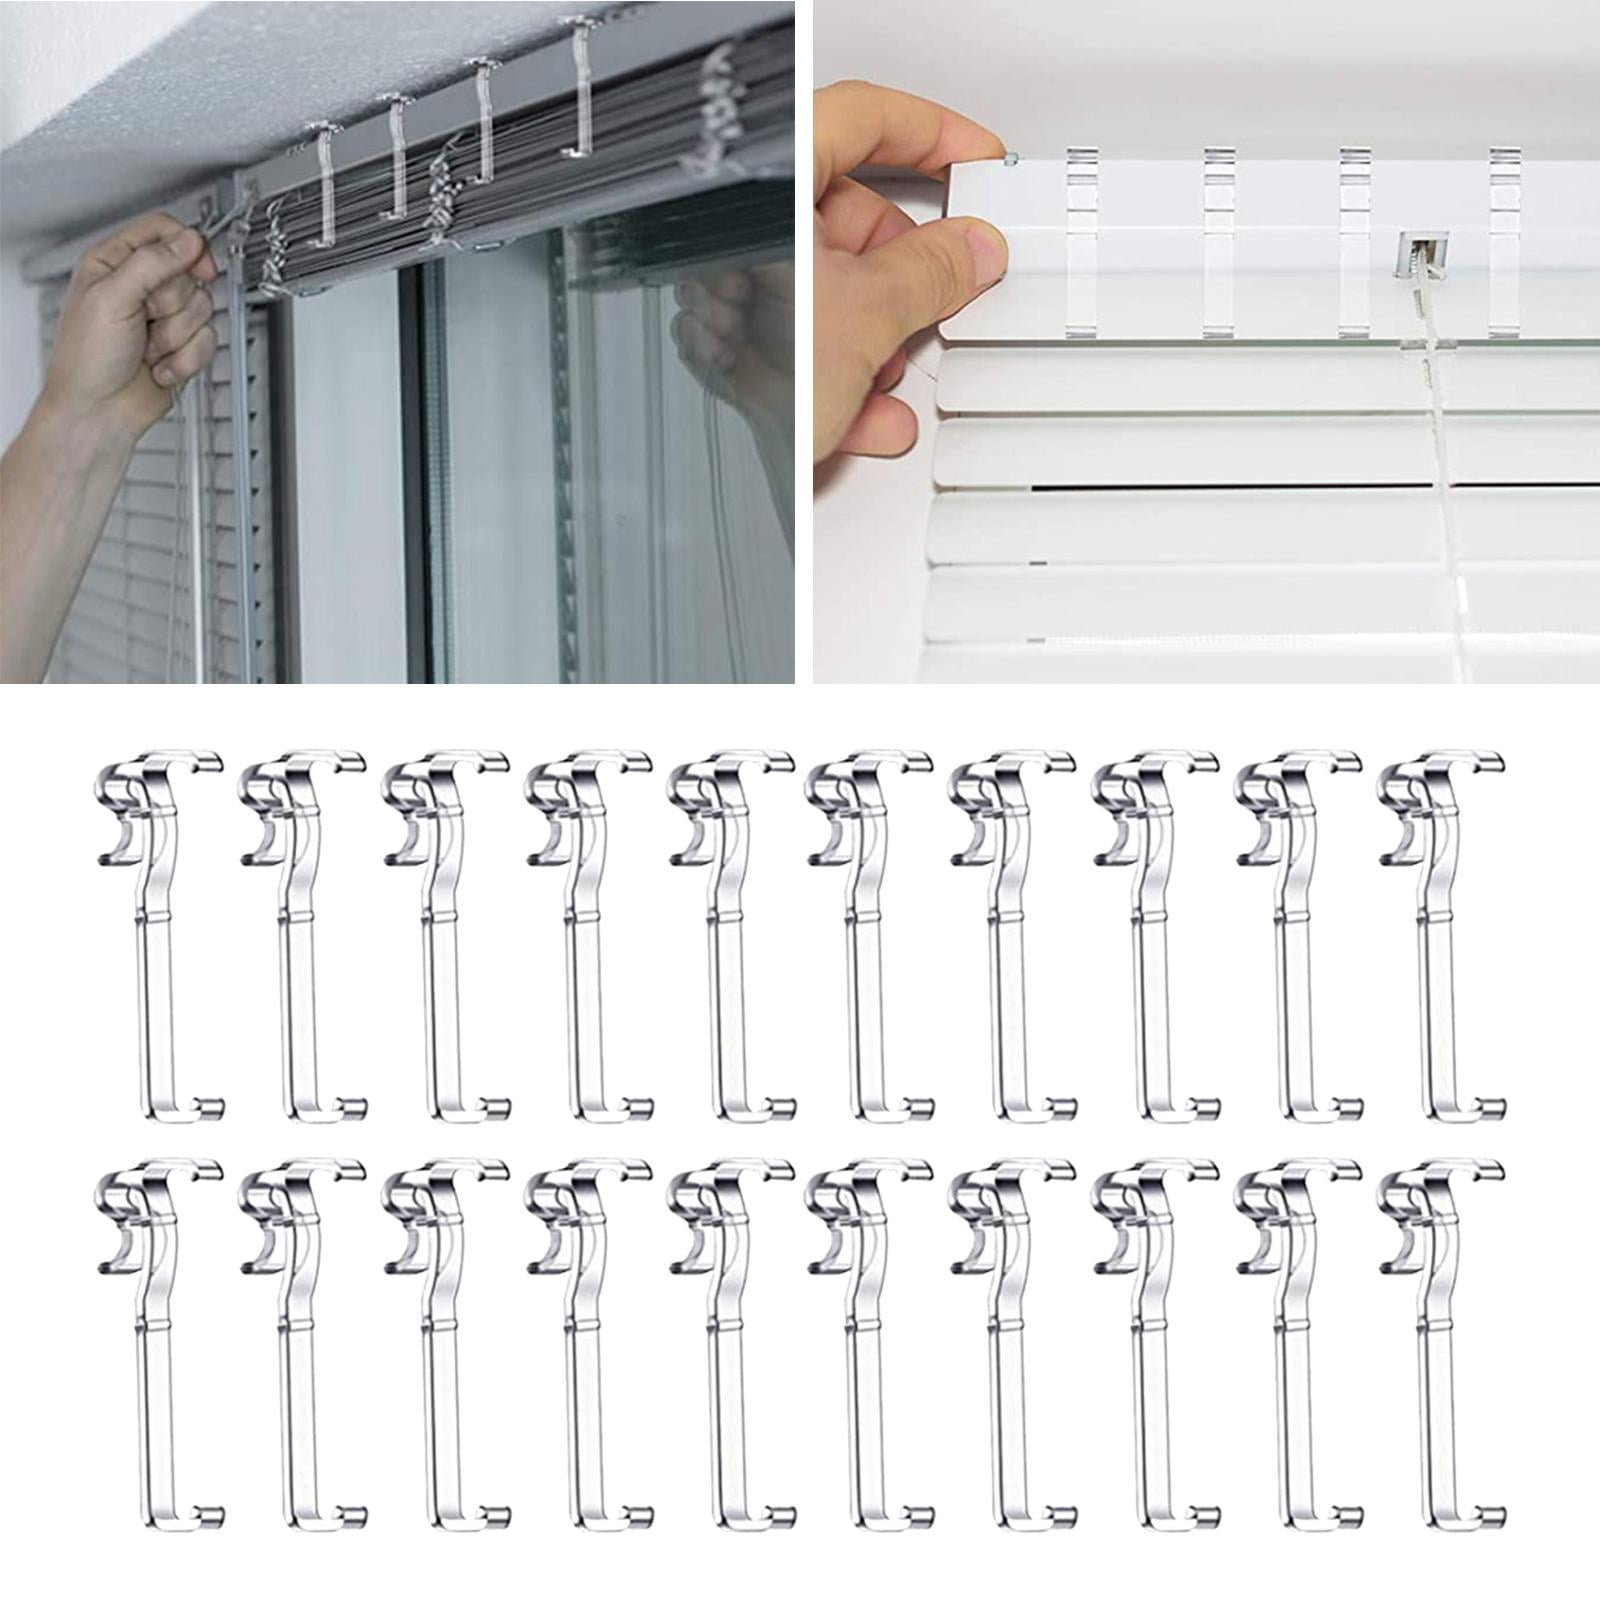 Curtain Spacers Valance Blind Replacement Parts Repair And Retainer Sheer  Clips From Doujiangne, $10.42